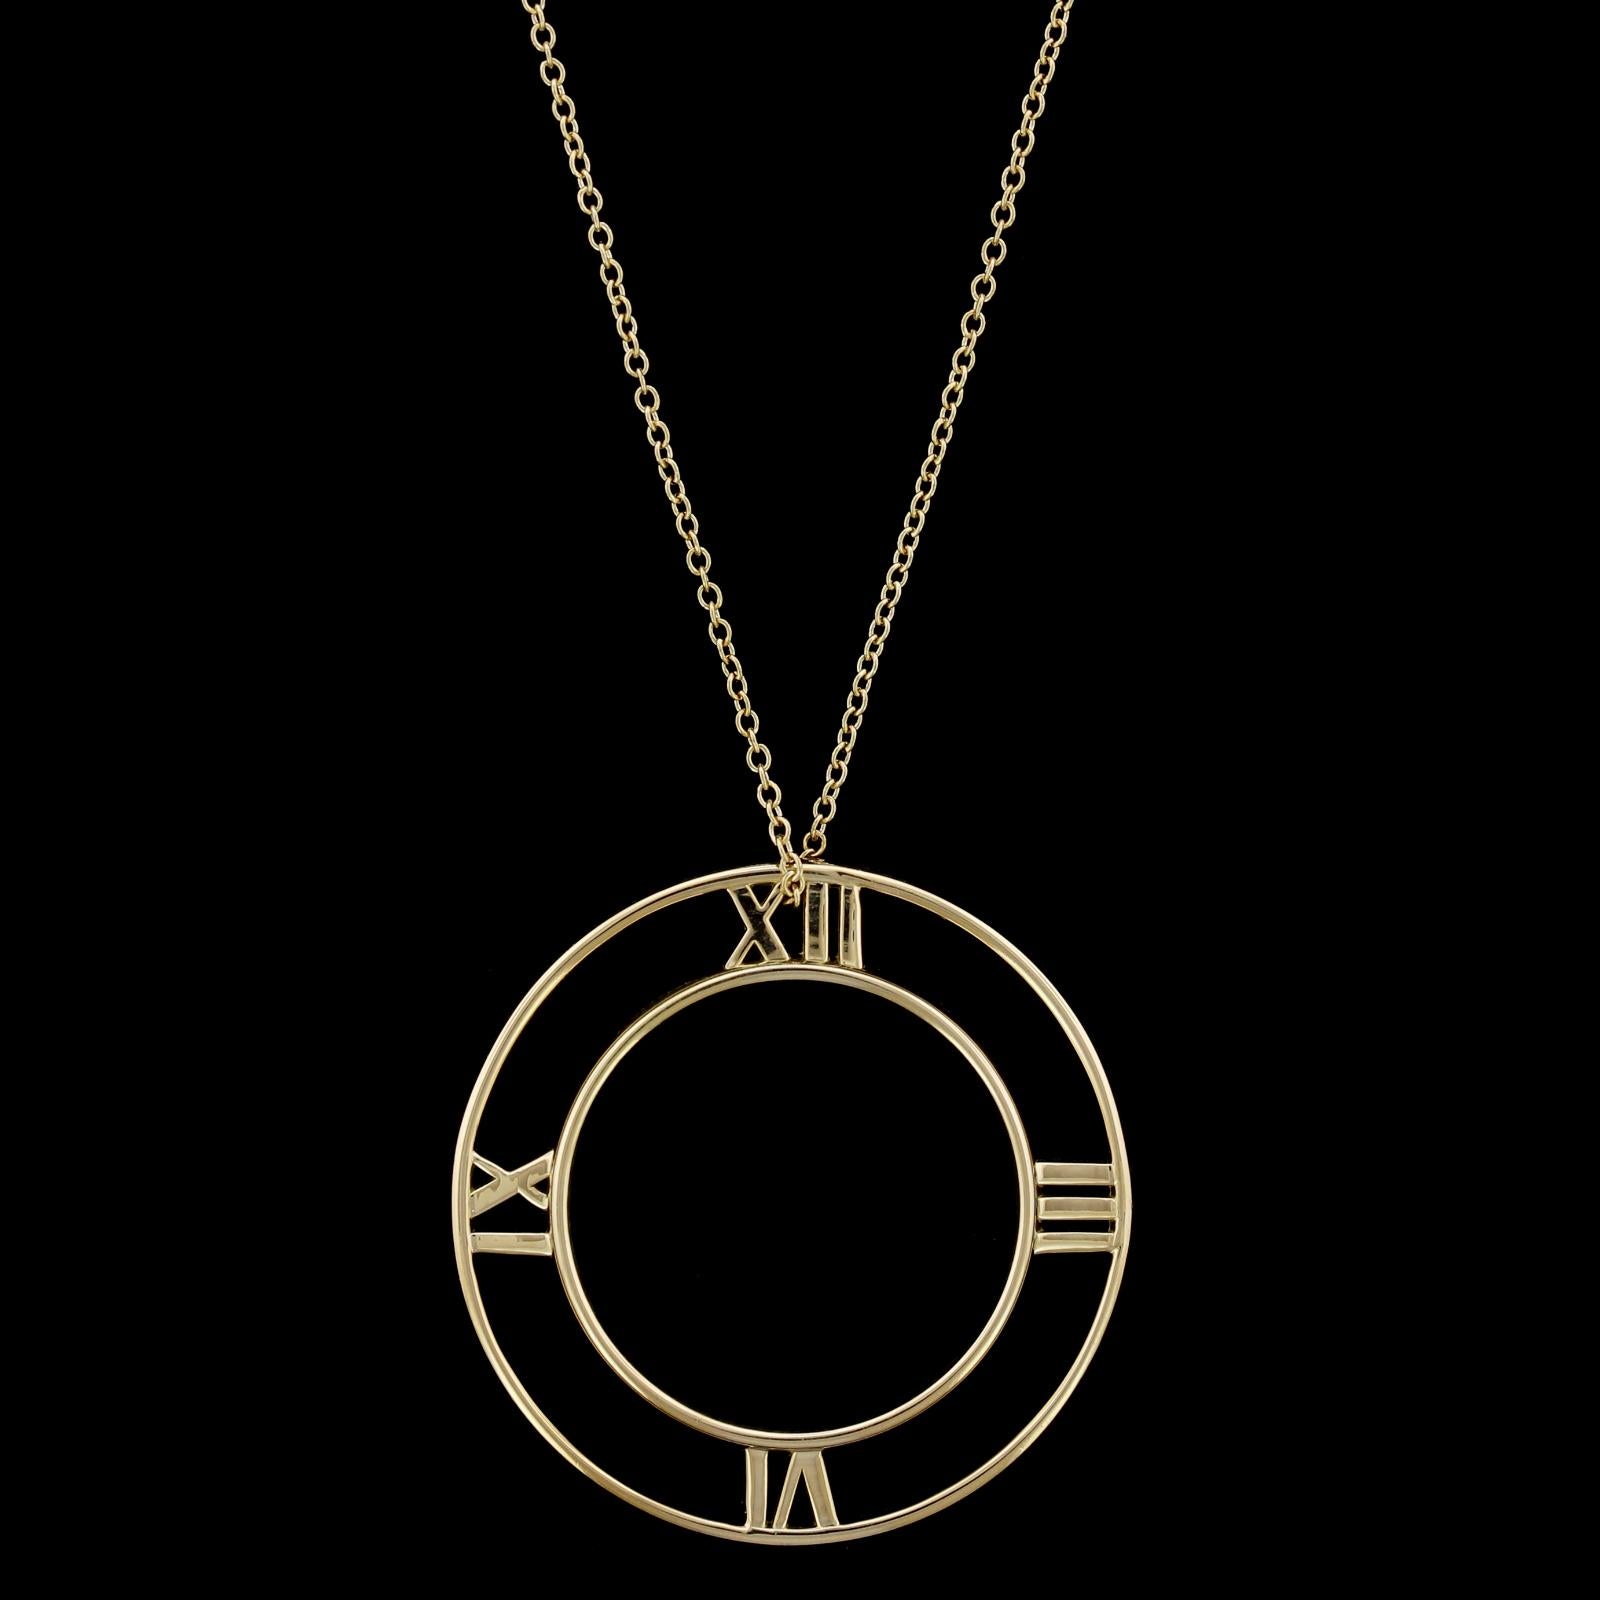 Tiffany & Co. 18K Yellow Gold Atlas Pendant Necklace. The pendant is suspended
from an 18